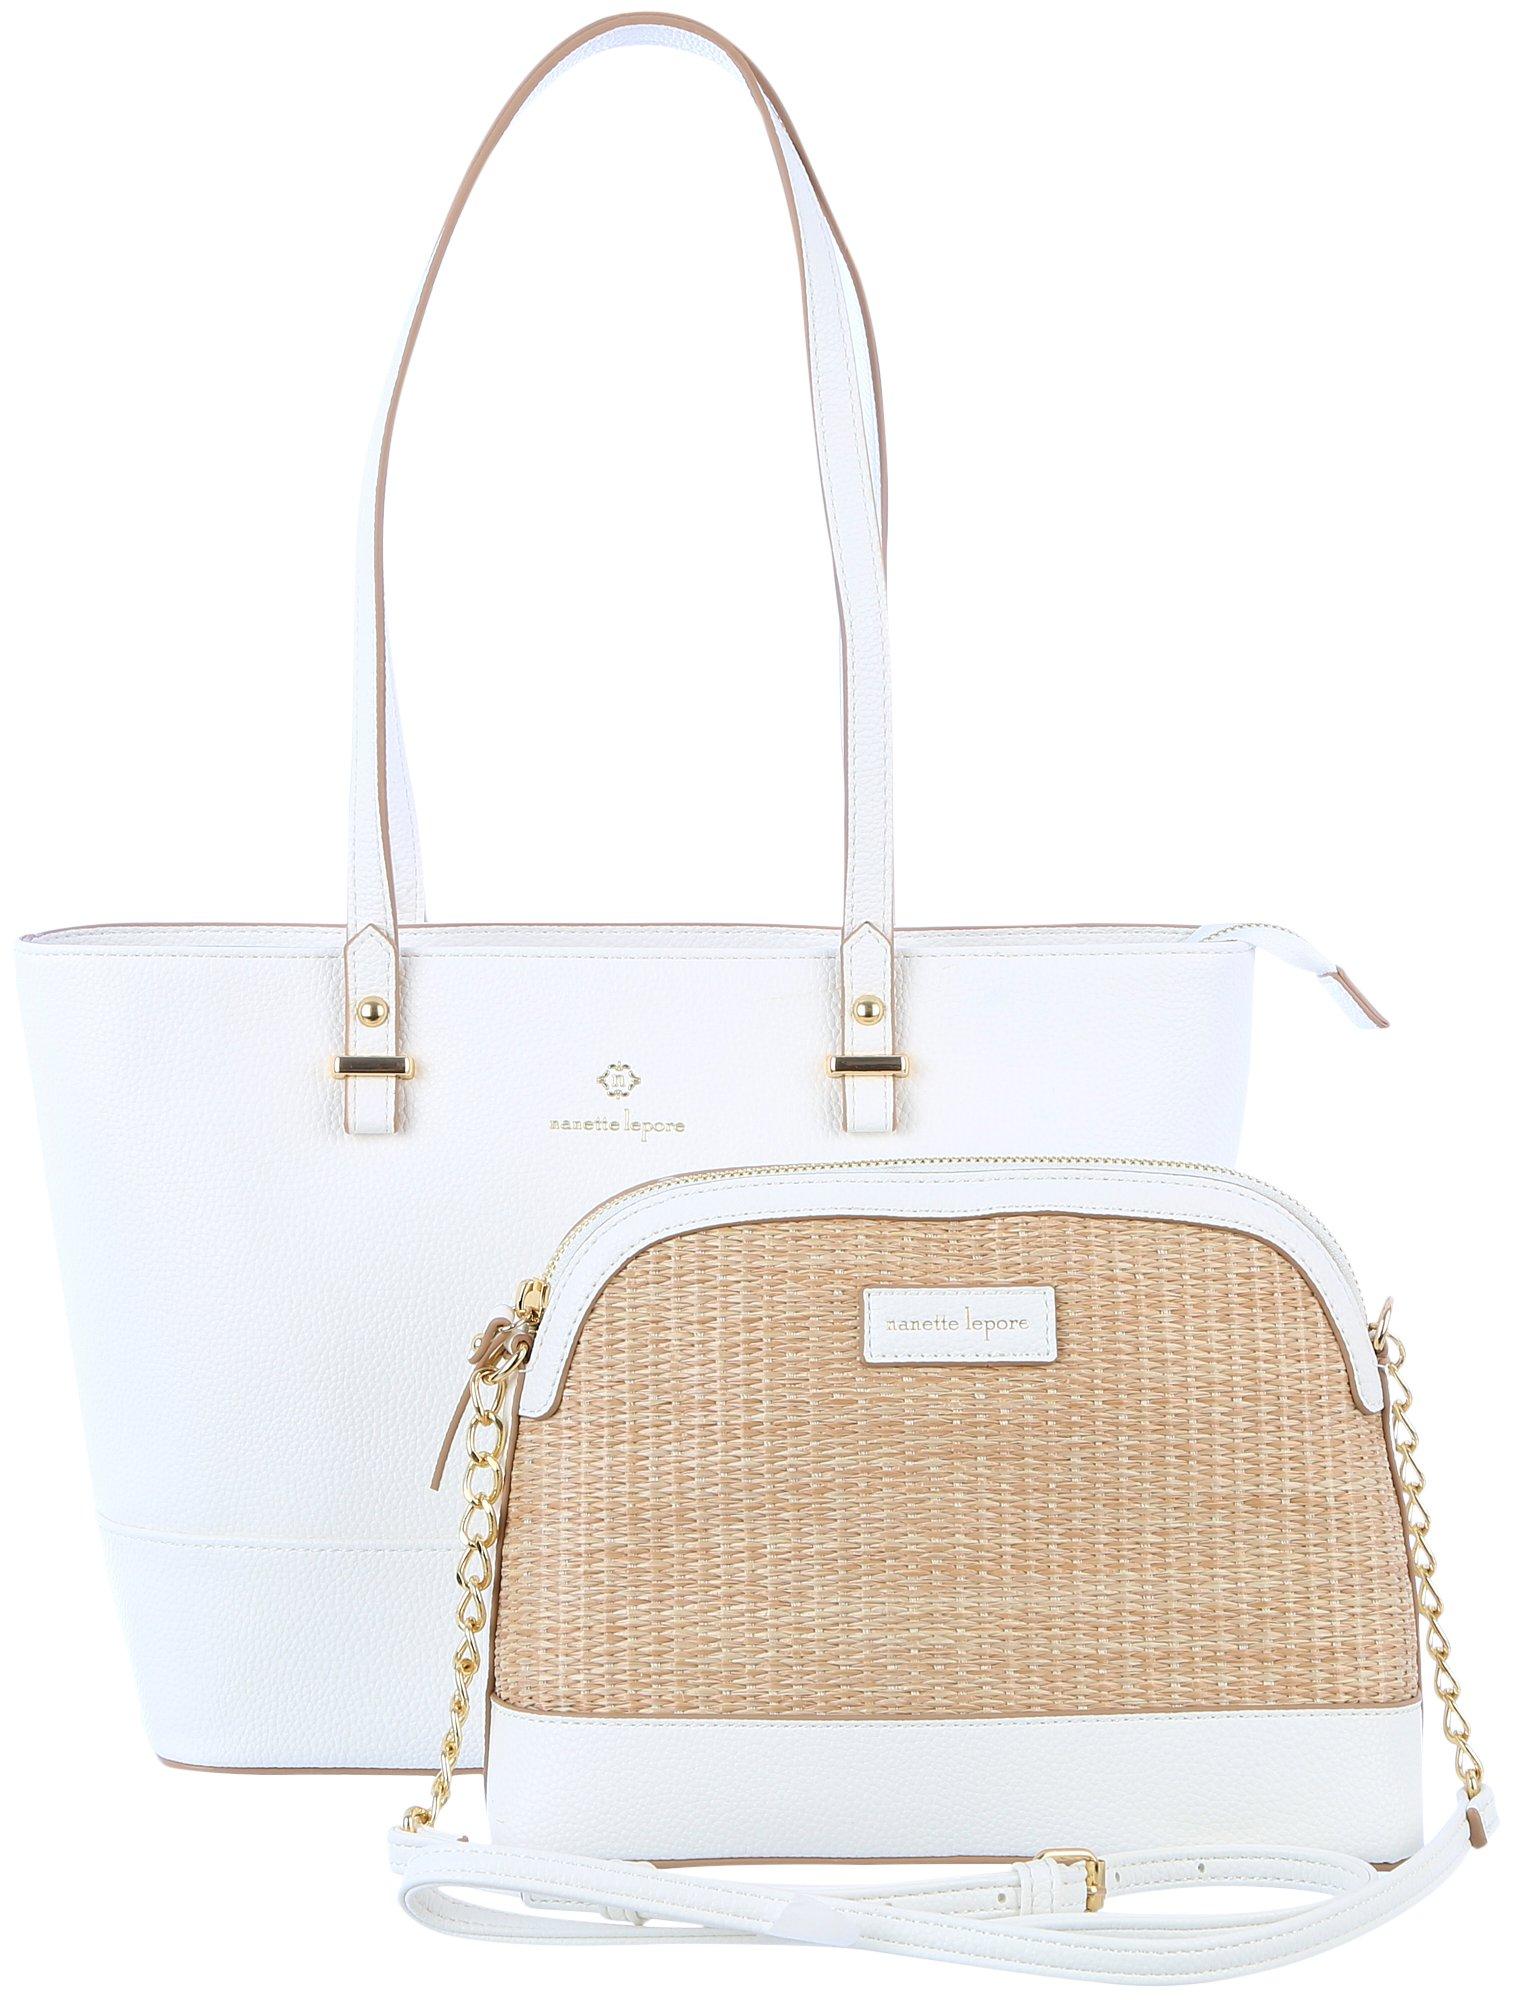 Brielle Bag-In-A-Bag Tote & Woven Crossbody